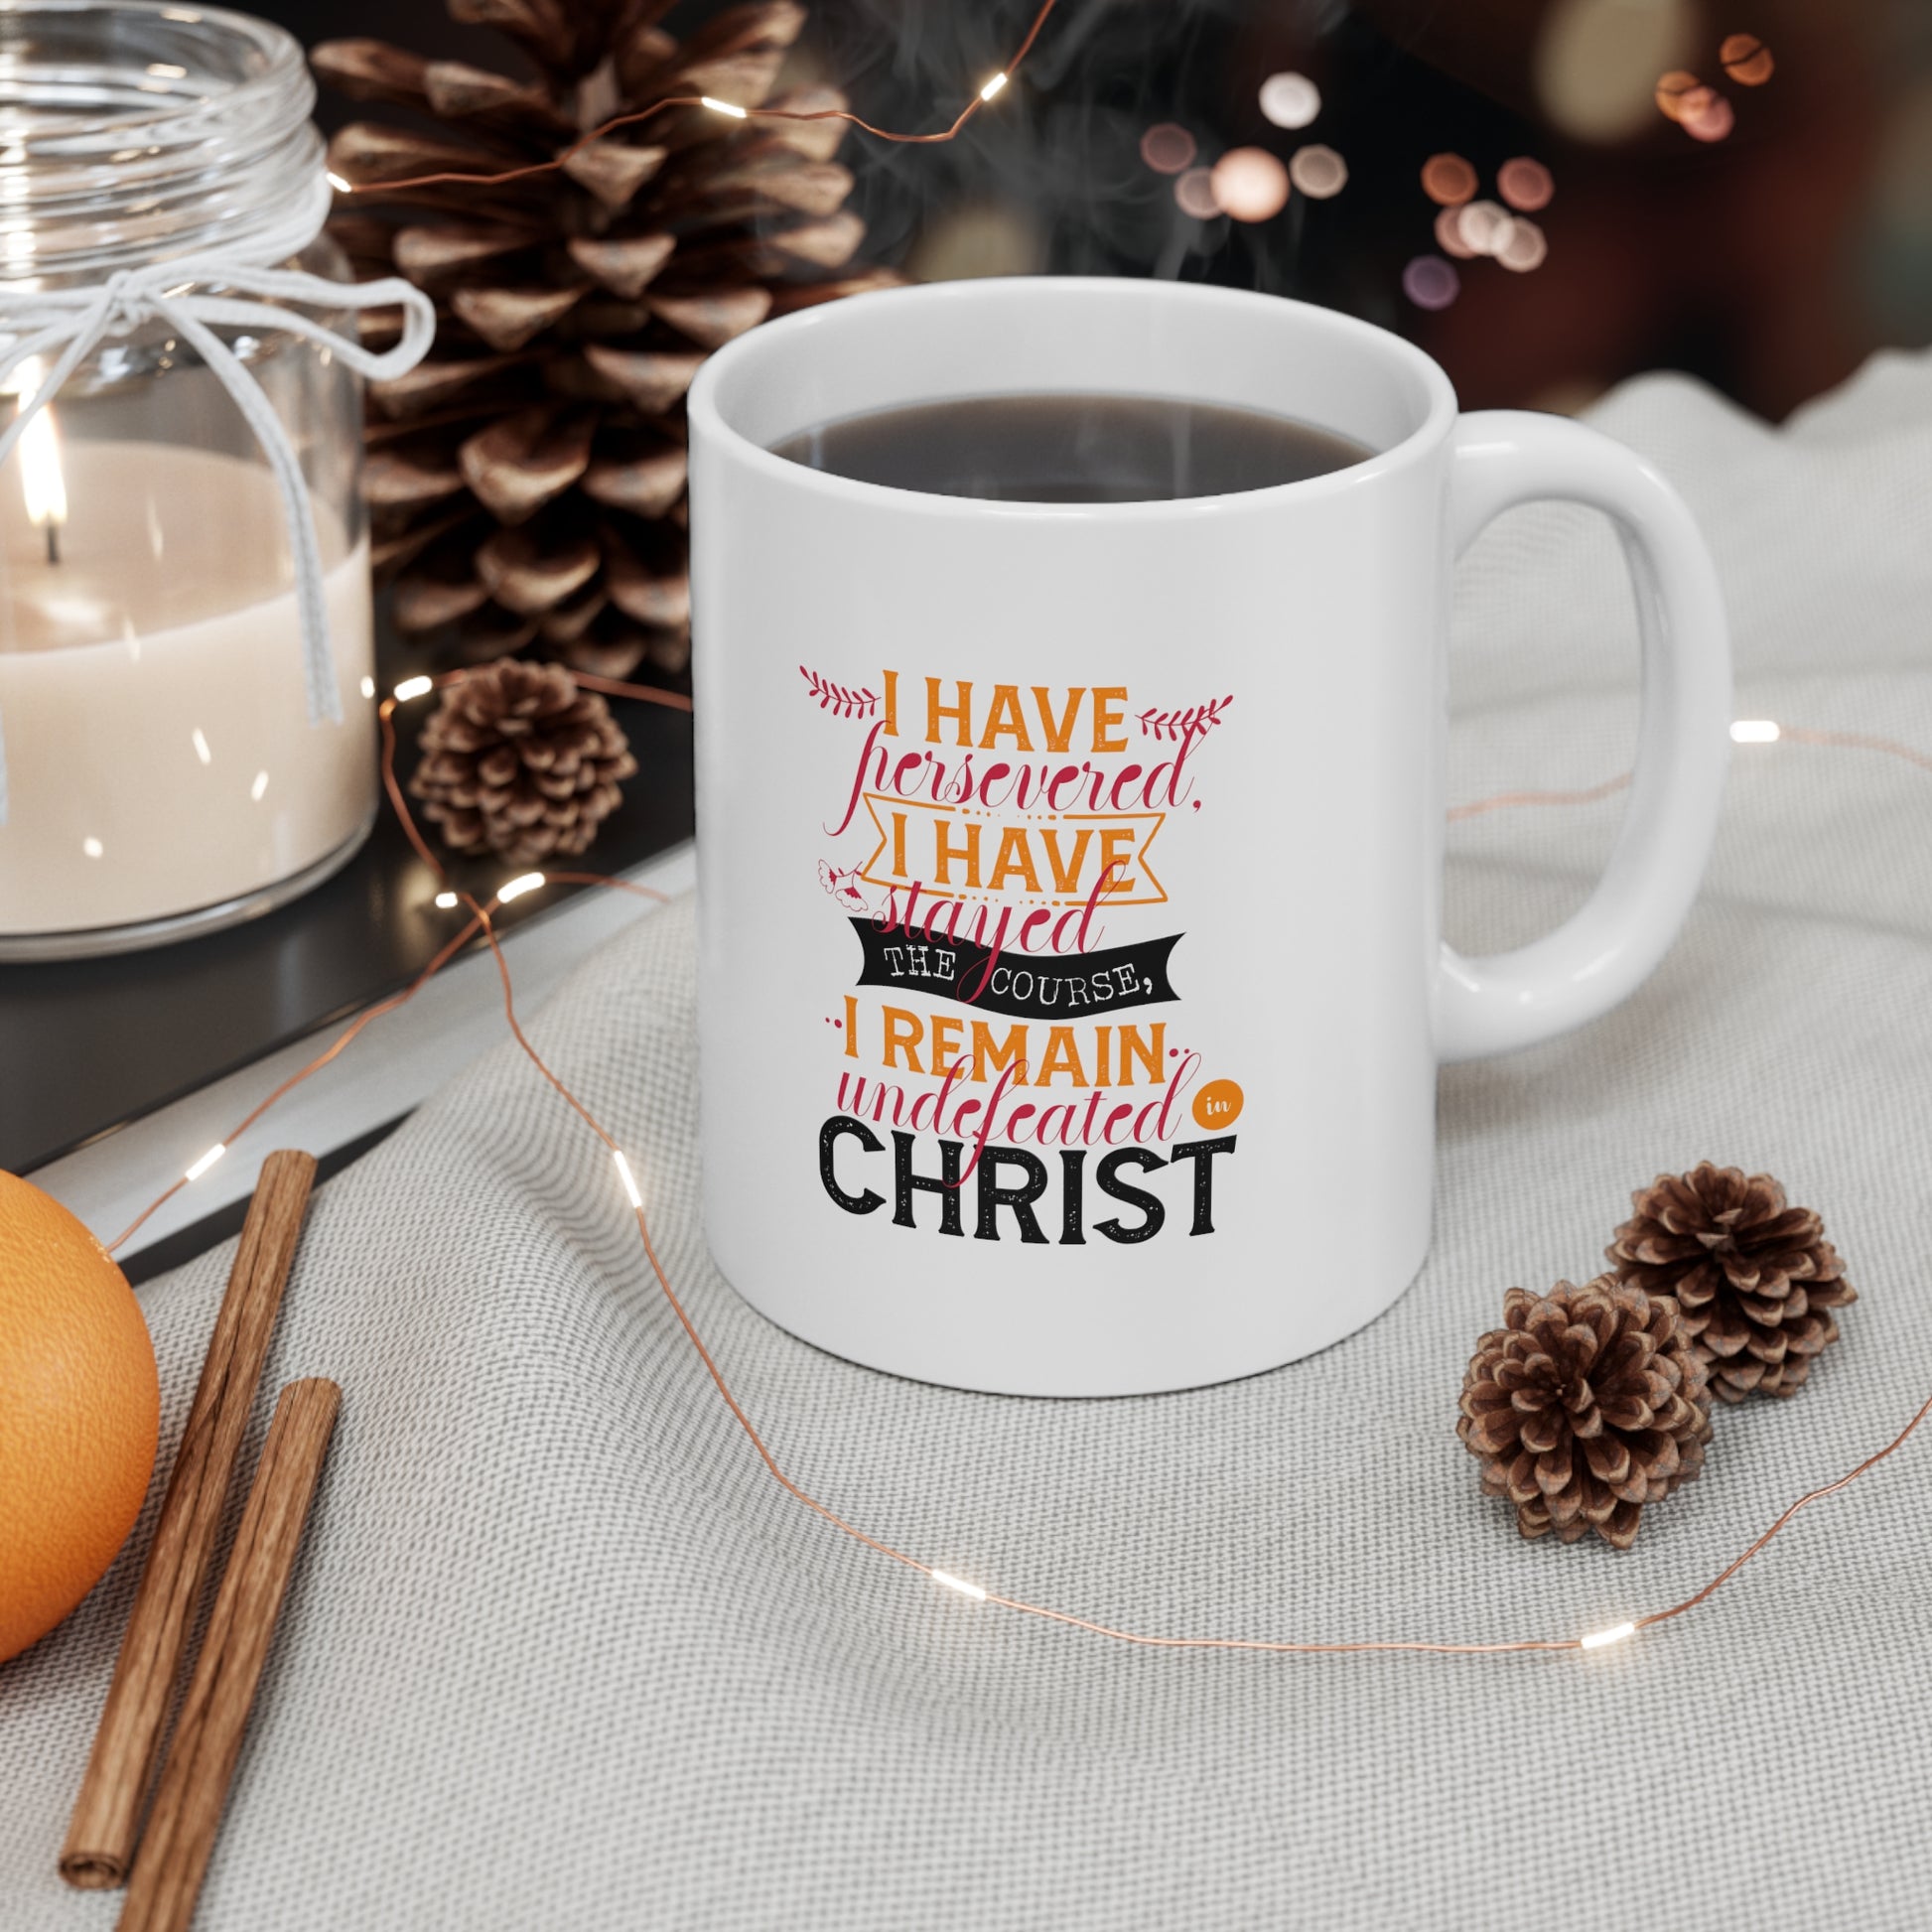 I Have Persevered I Have Stayed The Course I Remain Undefeated In Christ White Ceramic Mug 11oz (double sided printing) Printify